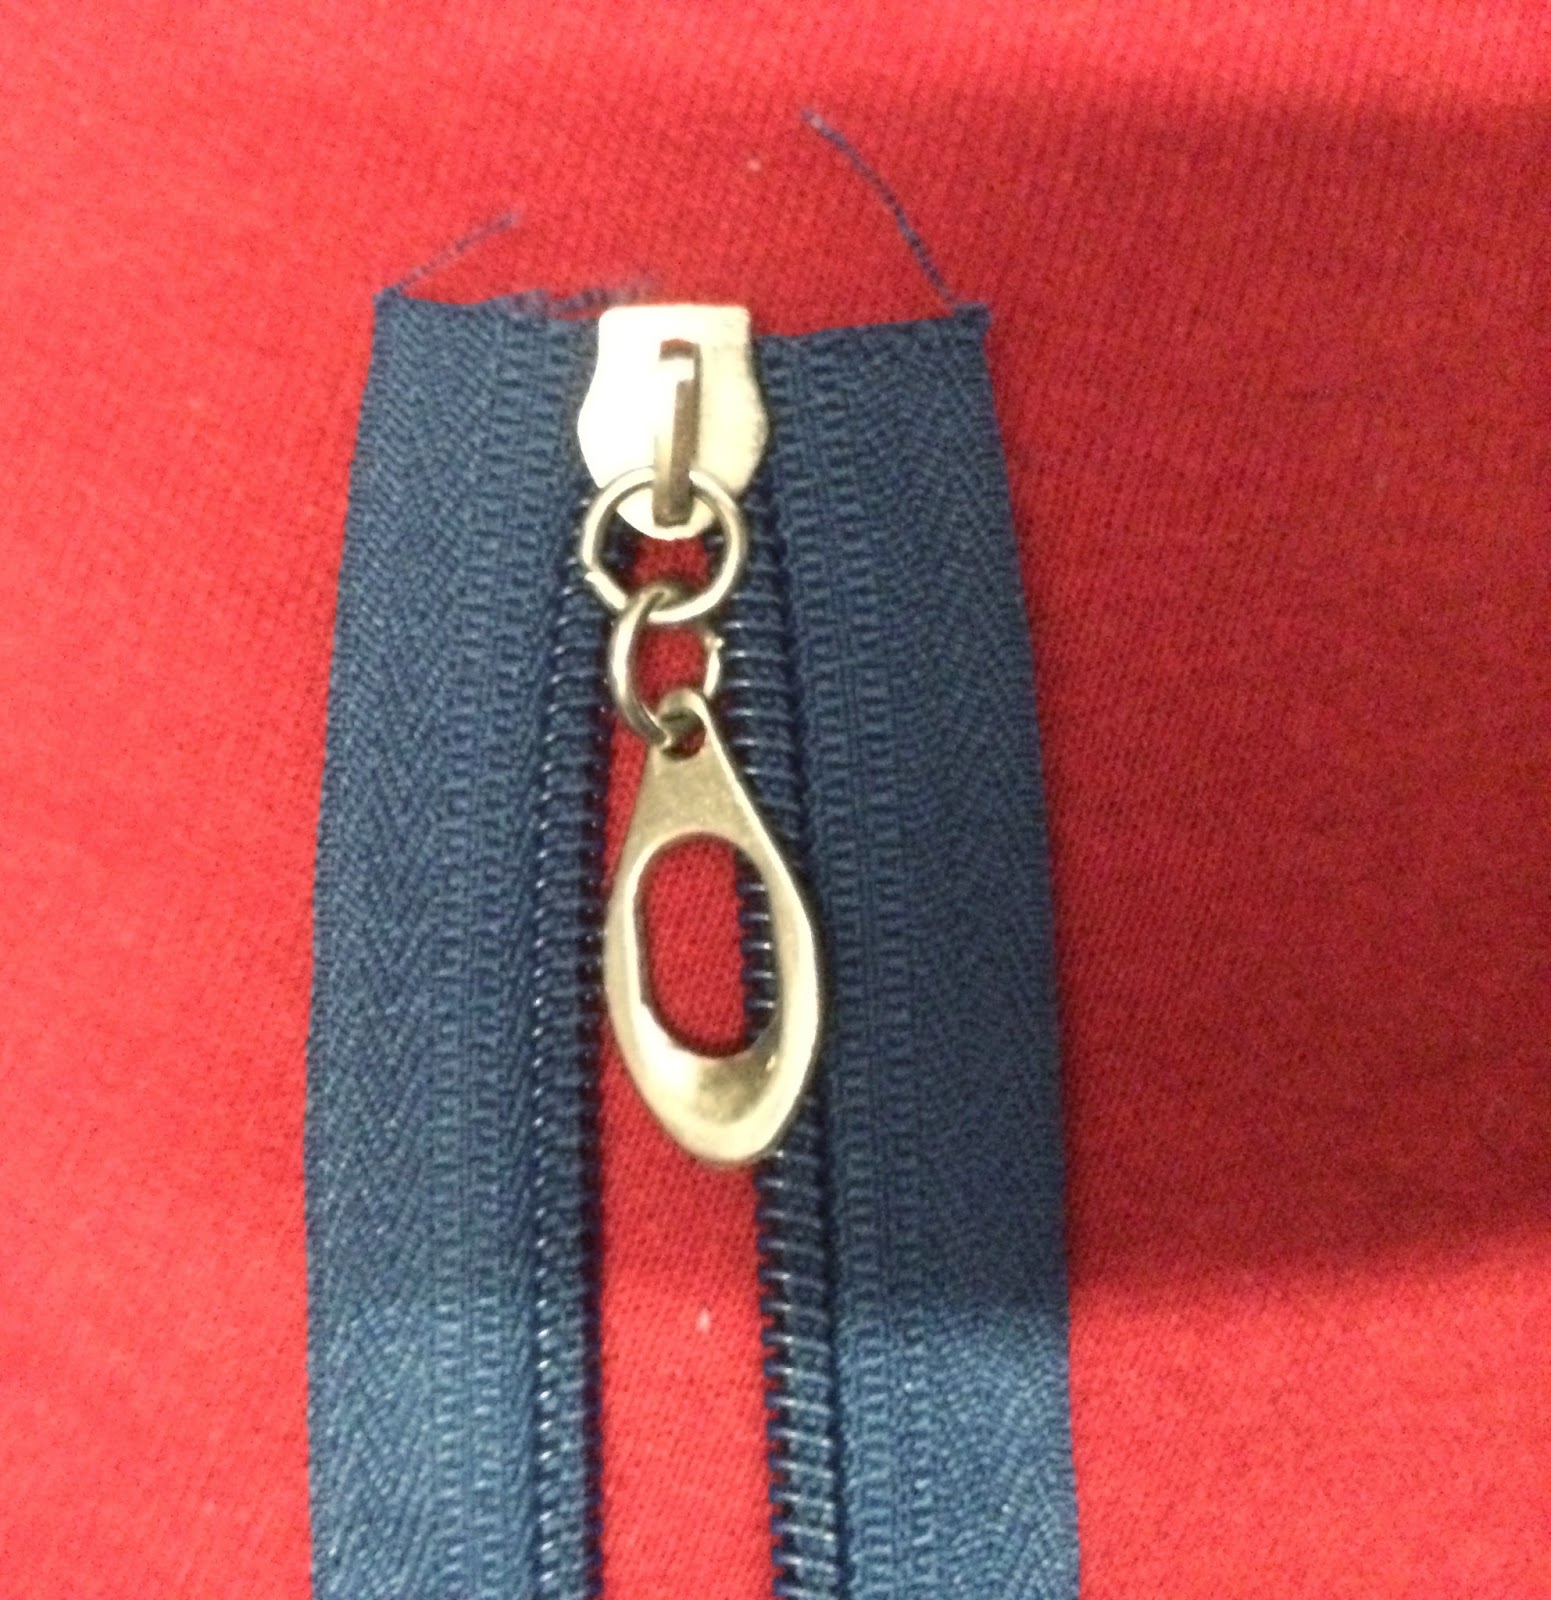 Creating a Double Pull Zipper